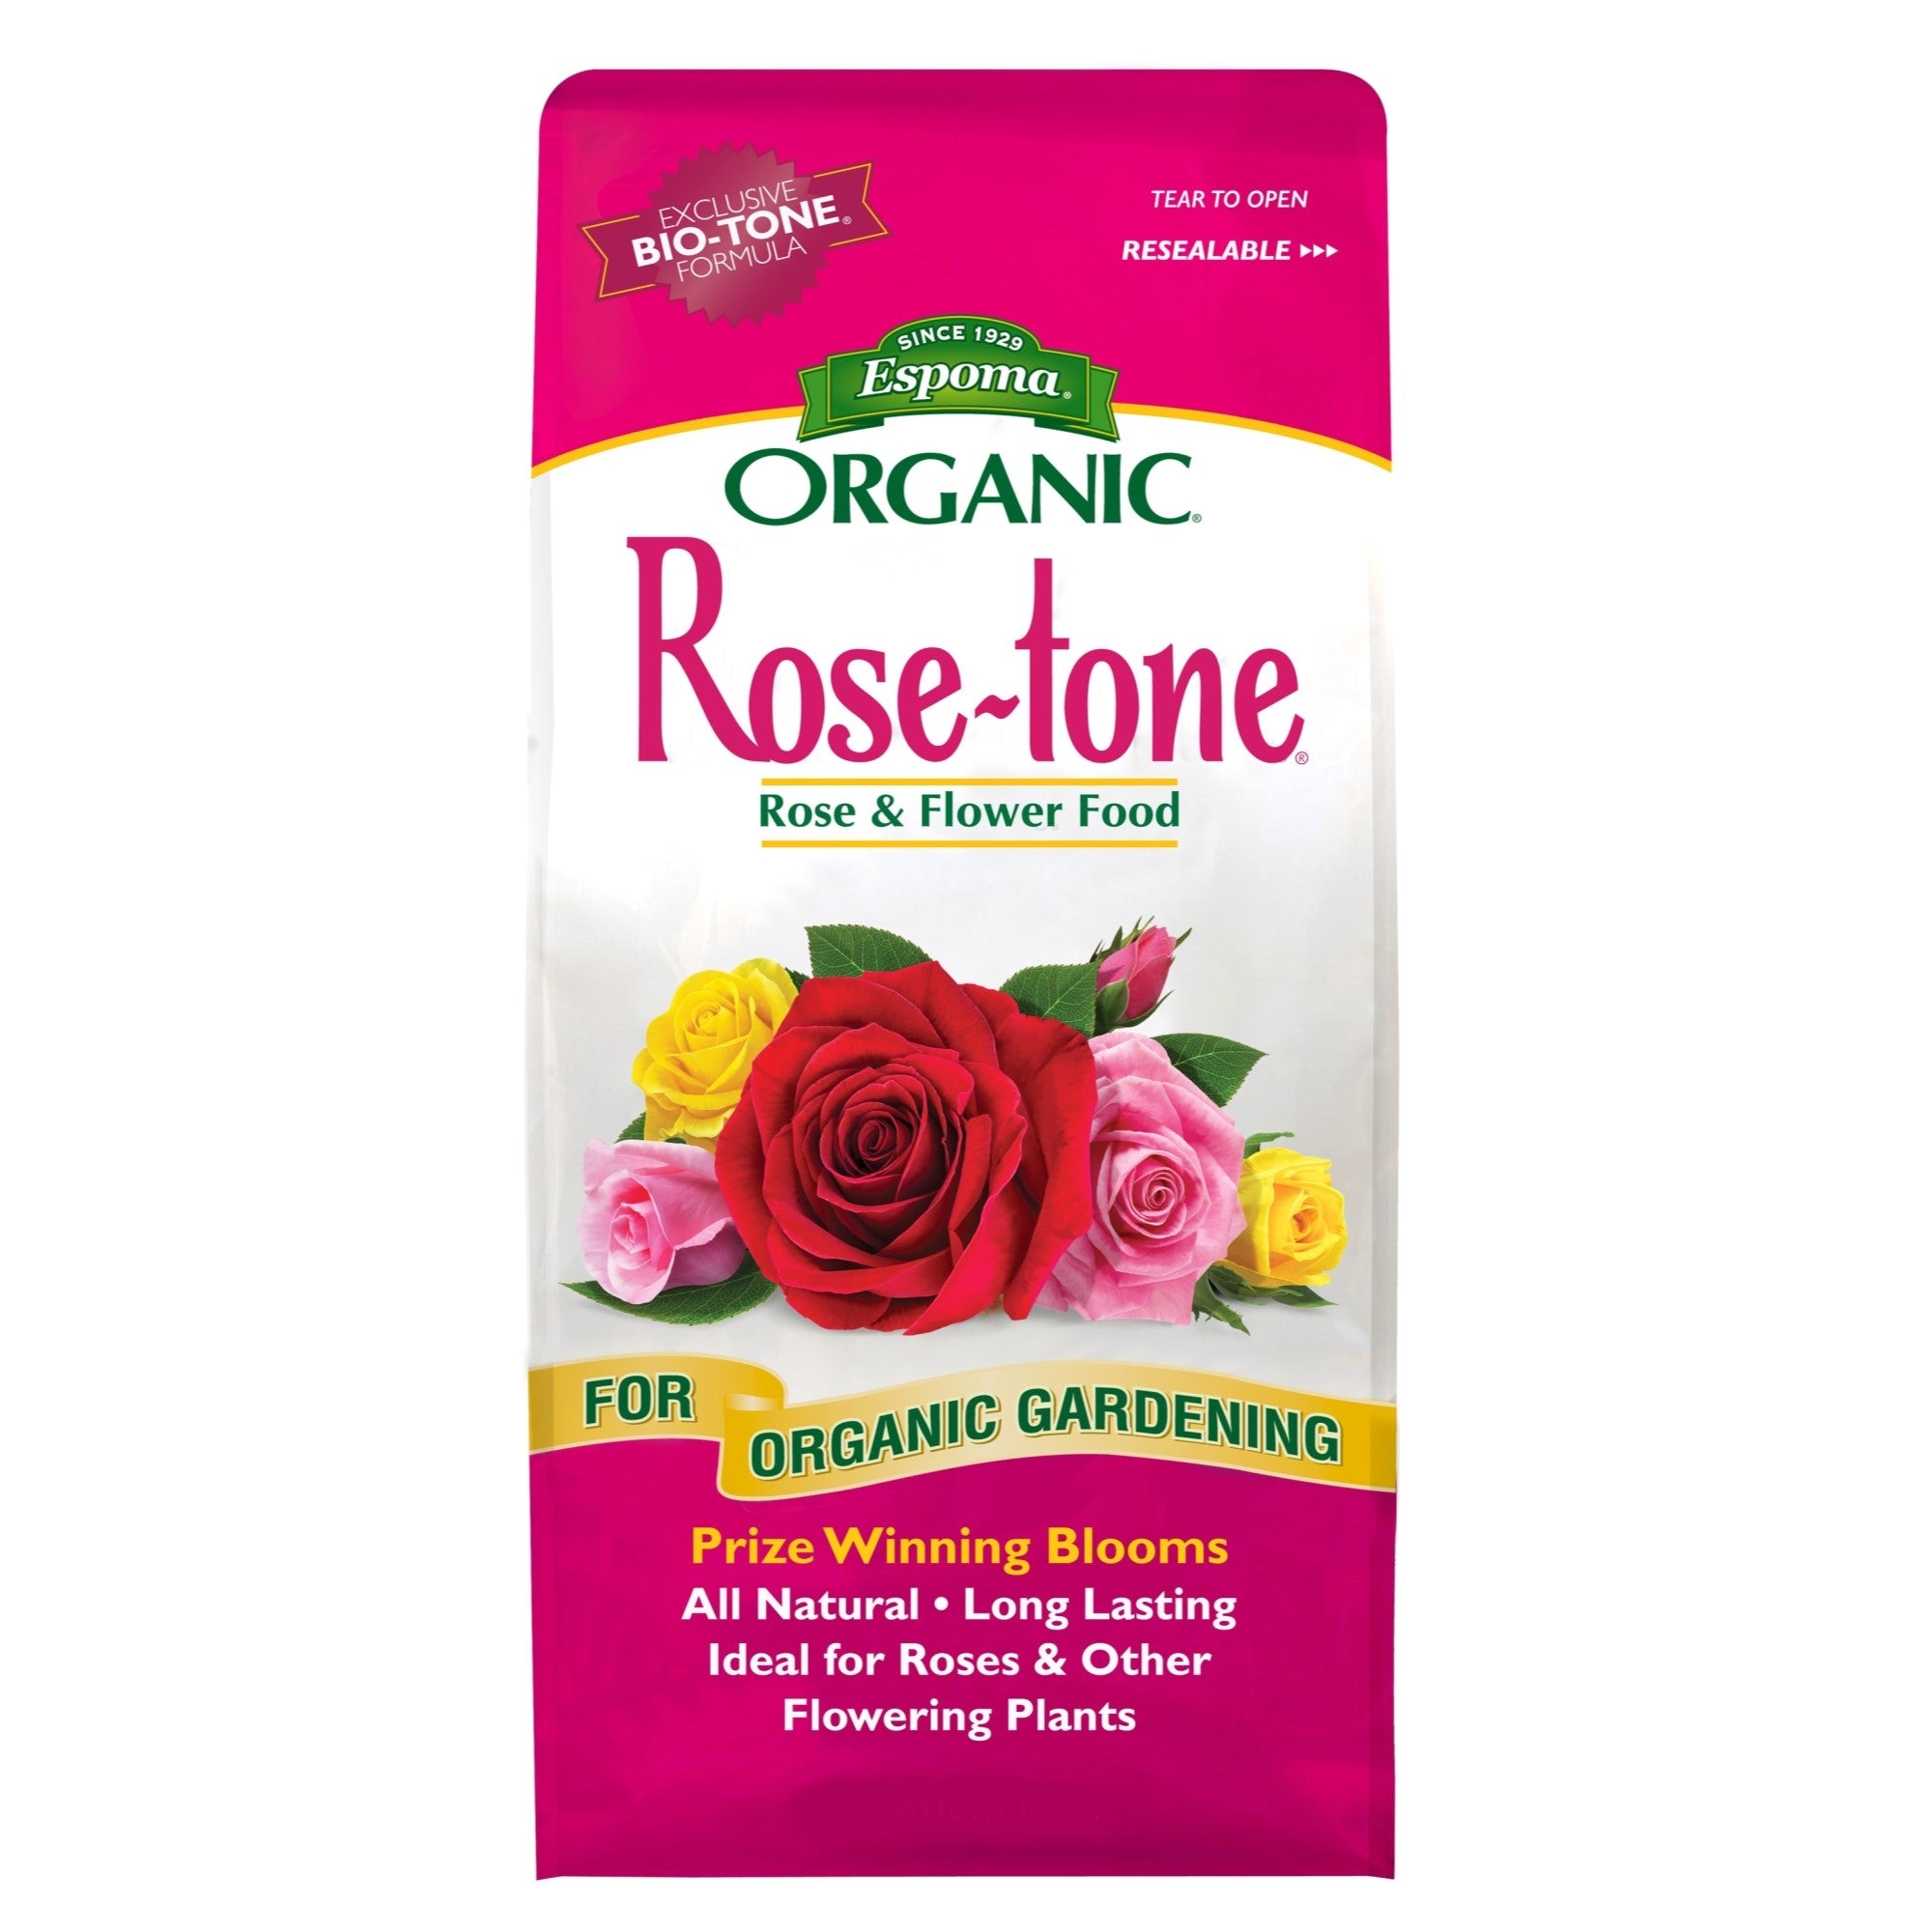 Espoma Organic Rose-tone 4-3-2 Rose & Flower for Organic Gardening, Prize Winning Blooms, All Natural, Ideal for Roses and Other Flowering Plants